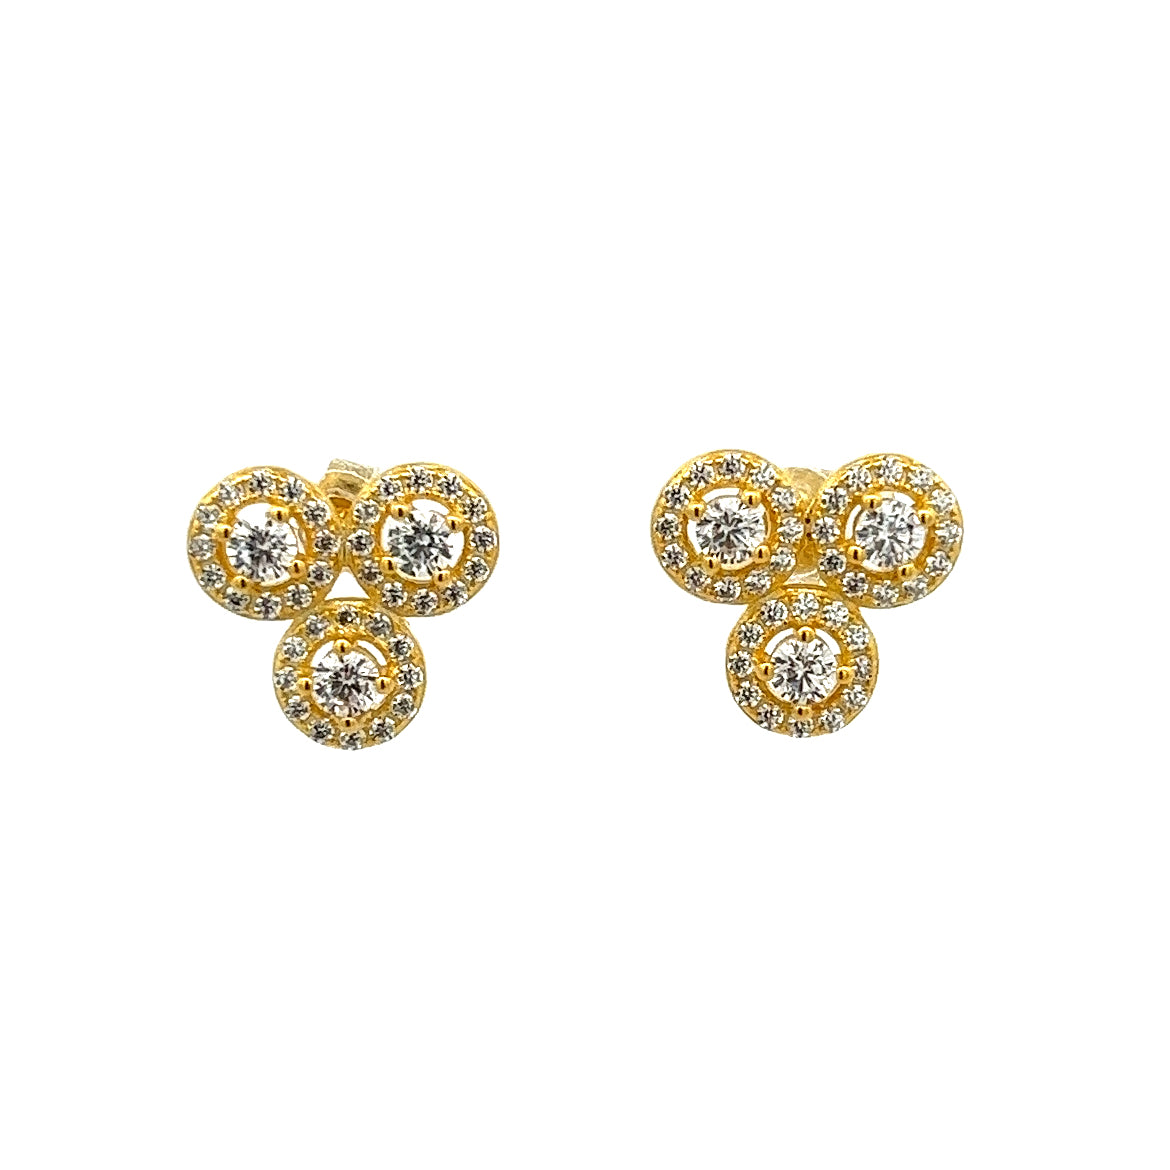 929 SILVER GOLD PLATED STUDS EARRINGS WITH CRYSTALS